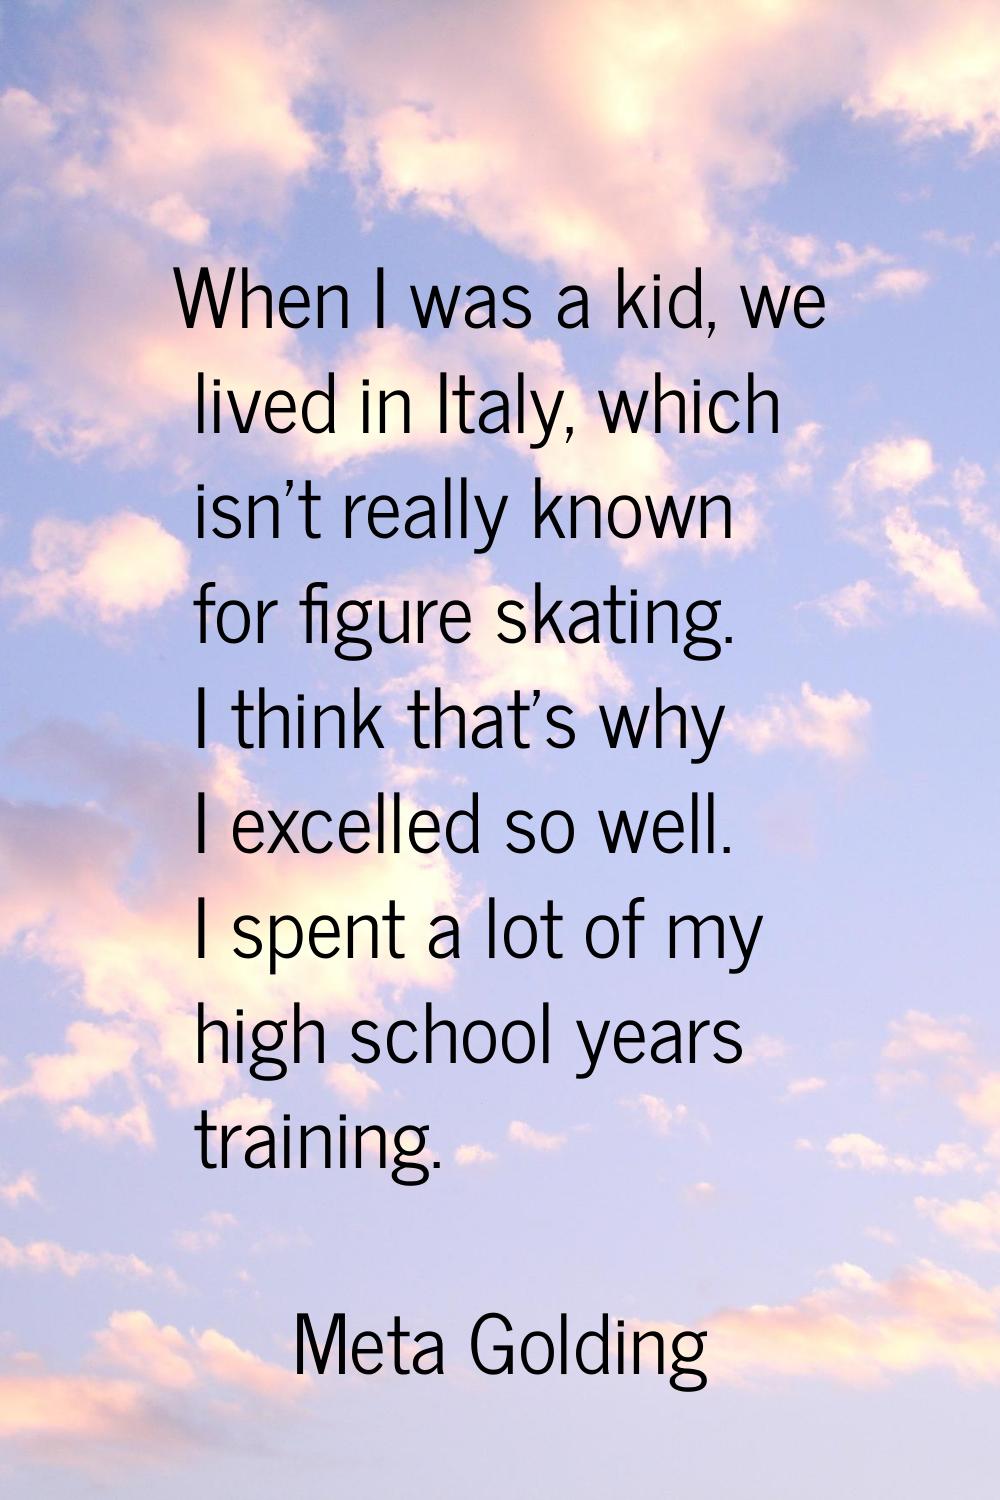 When I was a kid, we lived in Italy, which isn't really known for figure skating. I think that's wh